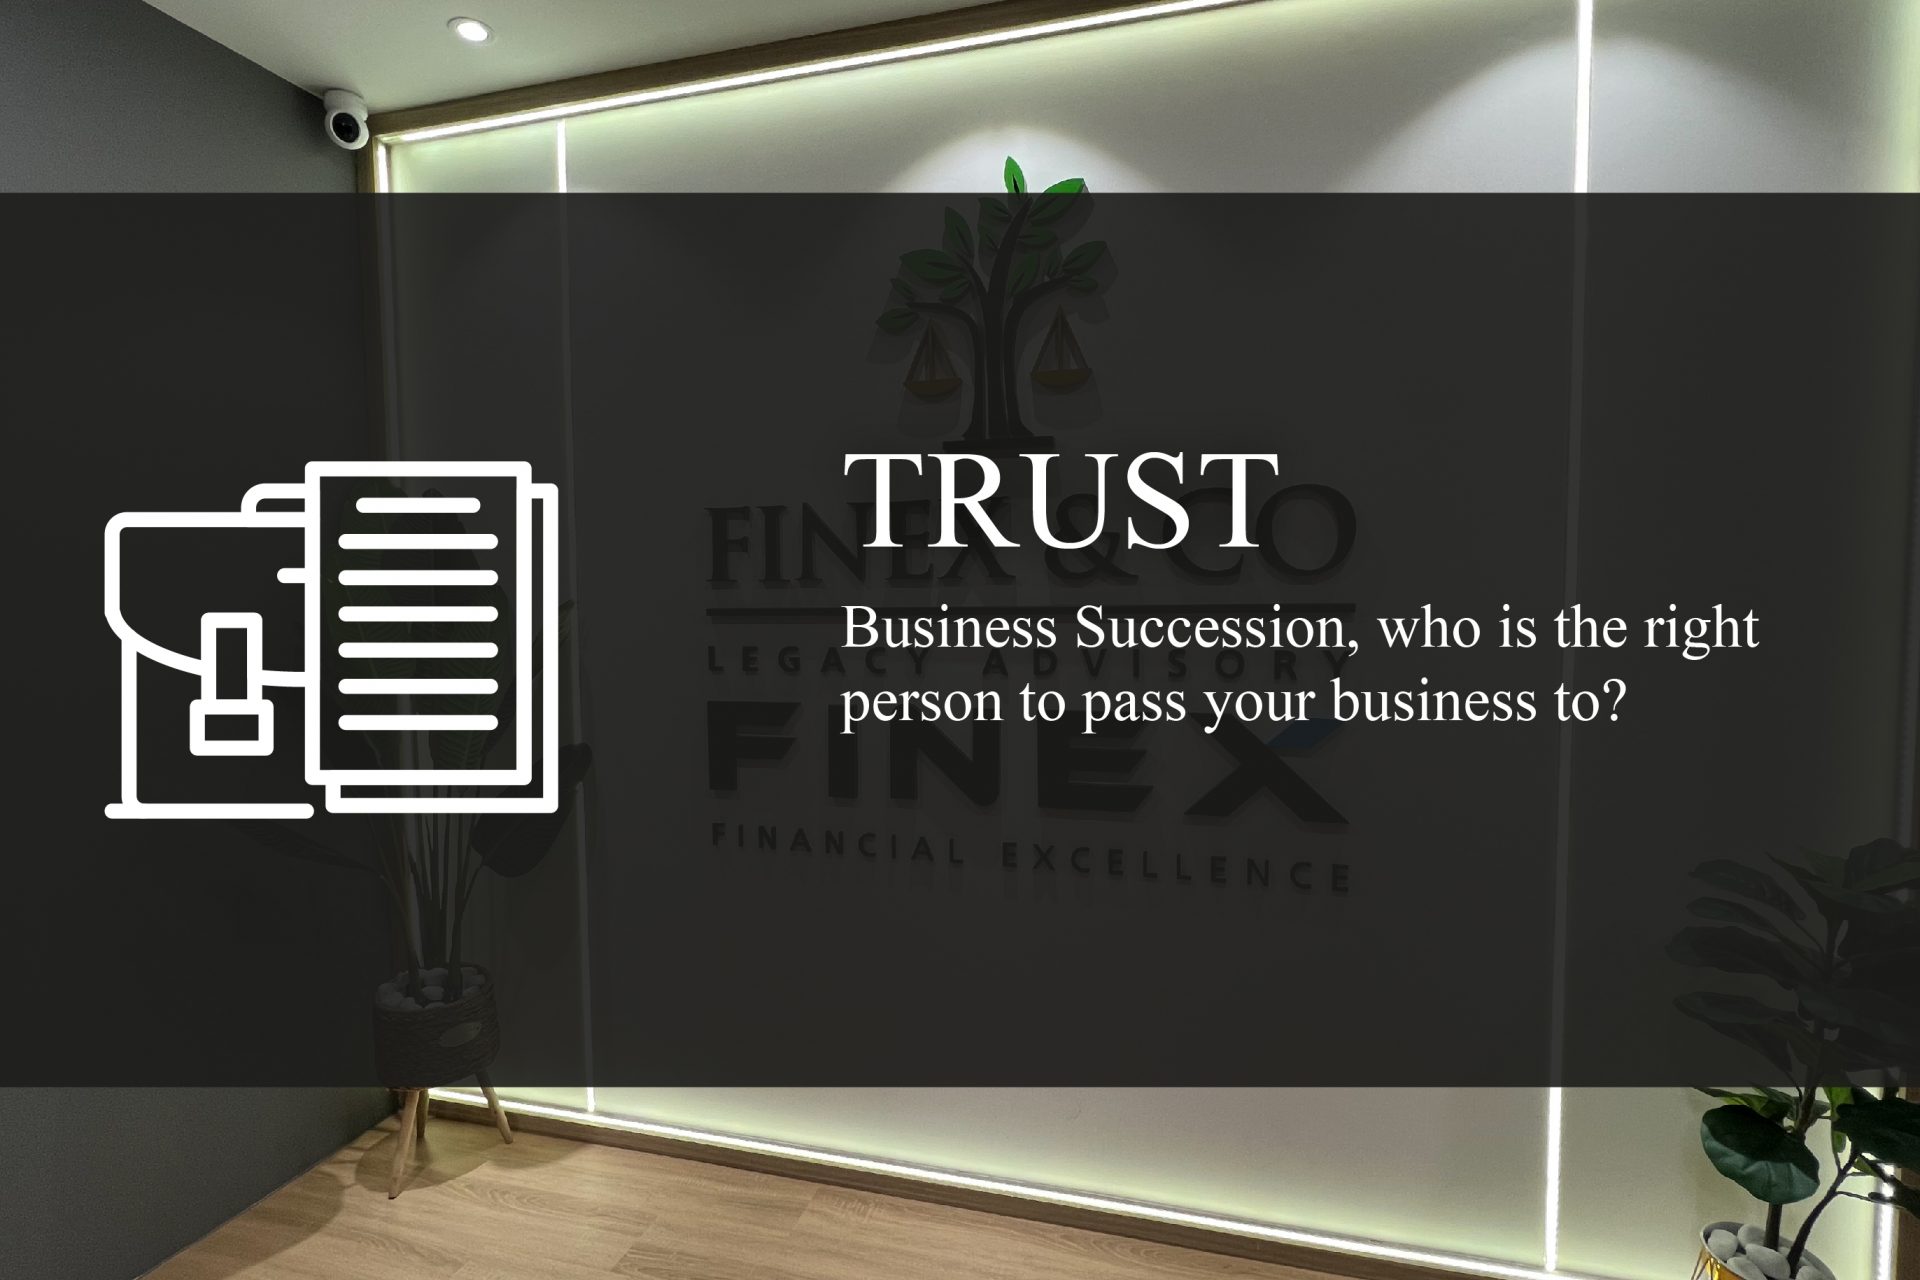 Business Succession, who is the right person to pass your business to?